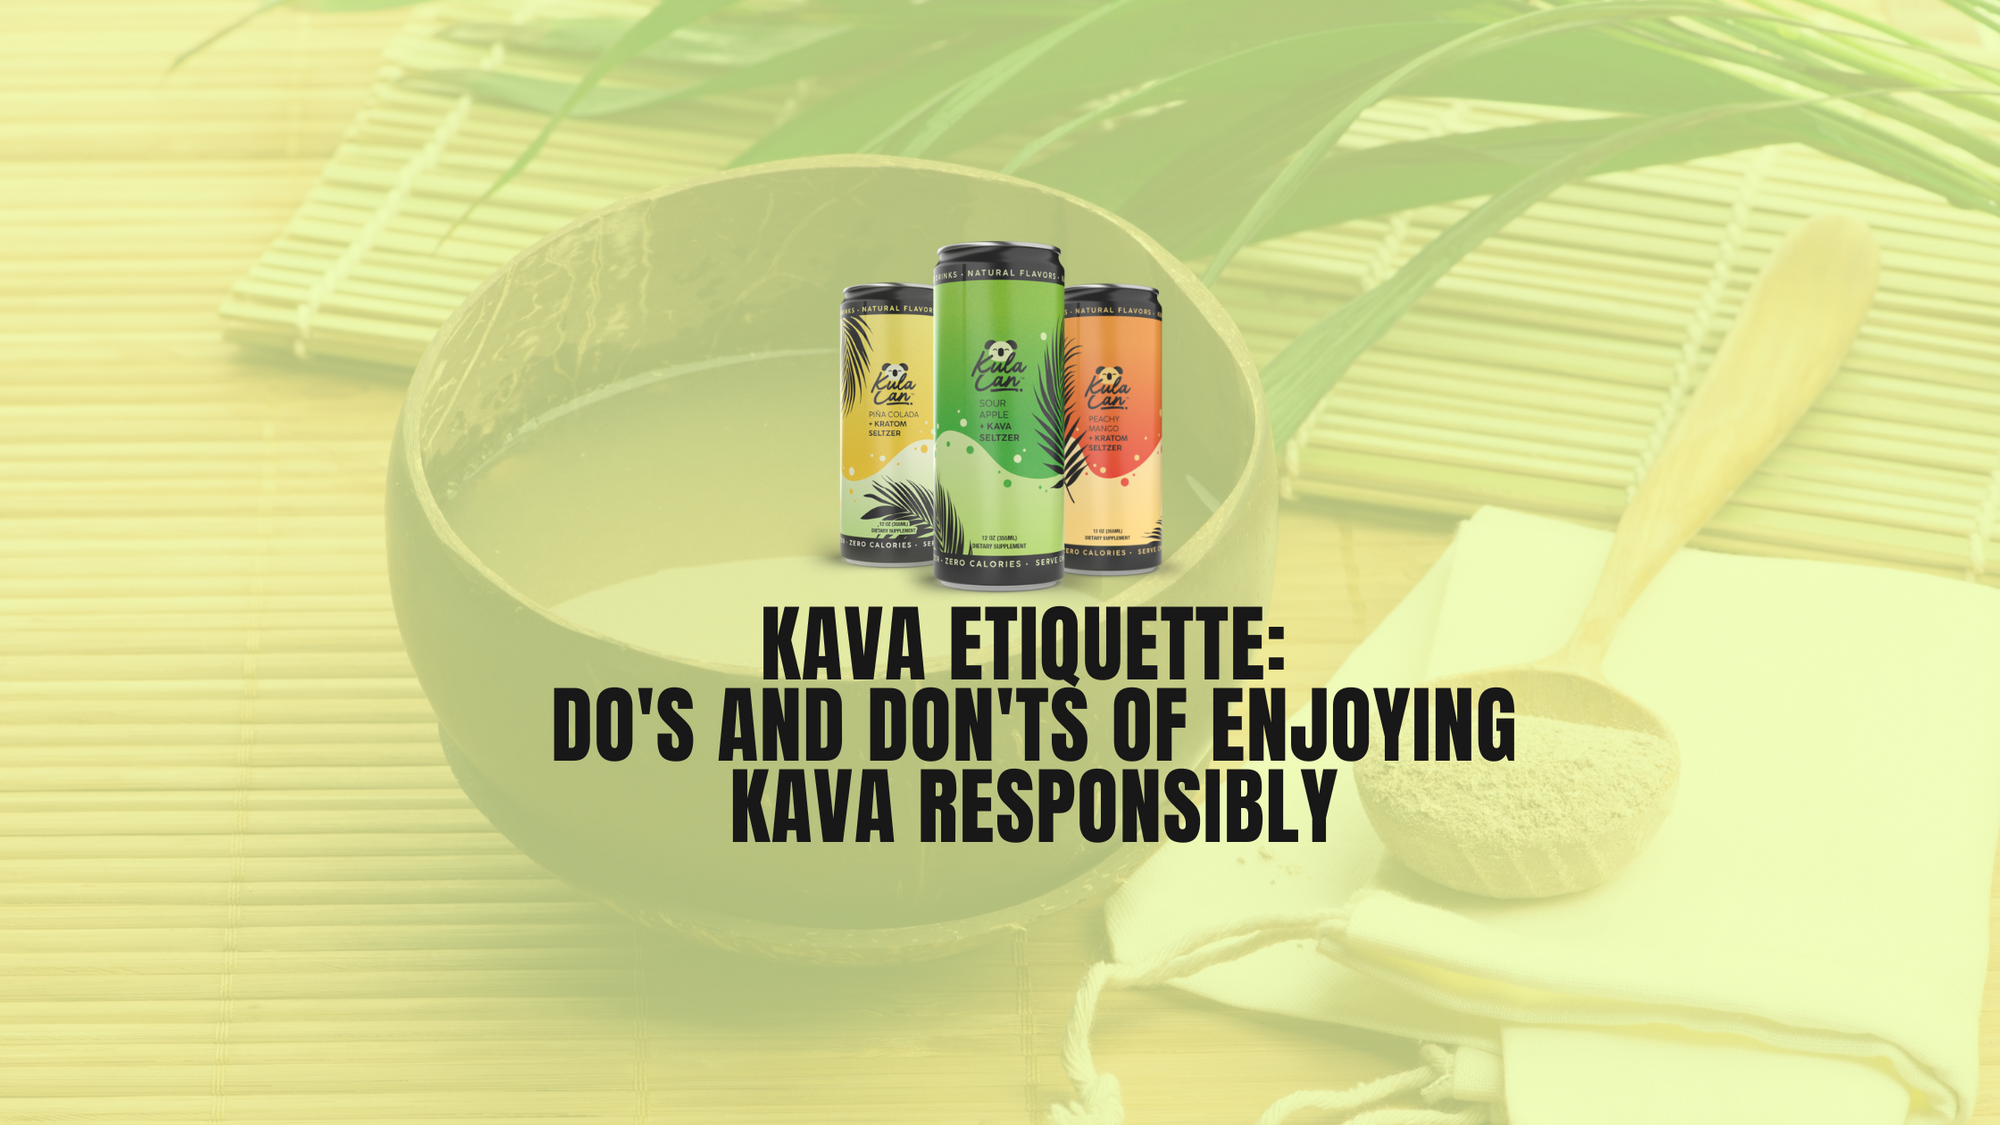 Kava Etiquette: Dos and Don'ts of Enjoying Kava Responsibly